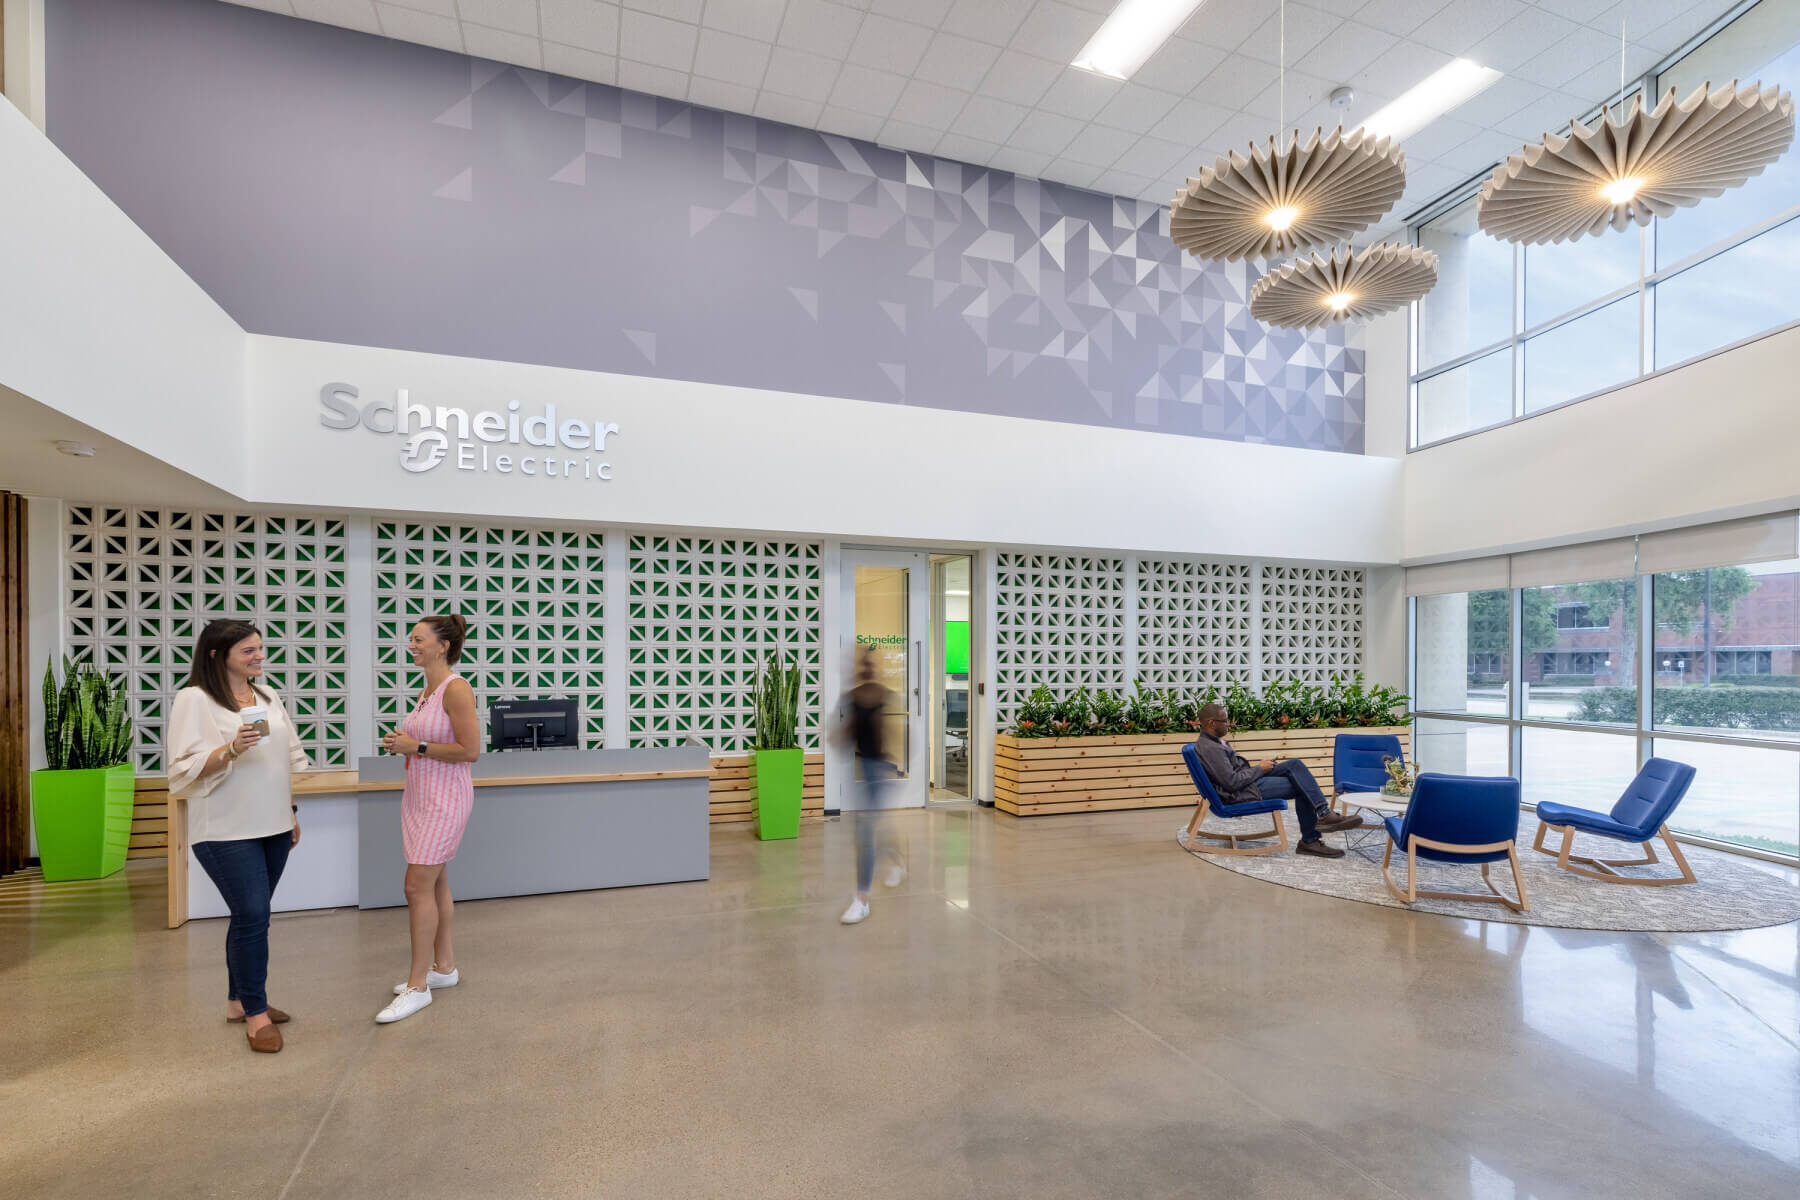 The lobby and reception area in the Schneider Electric Offices